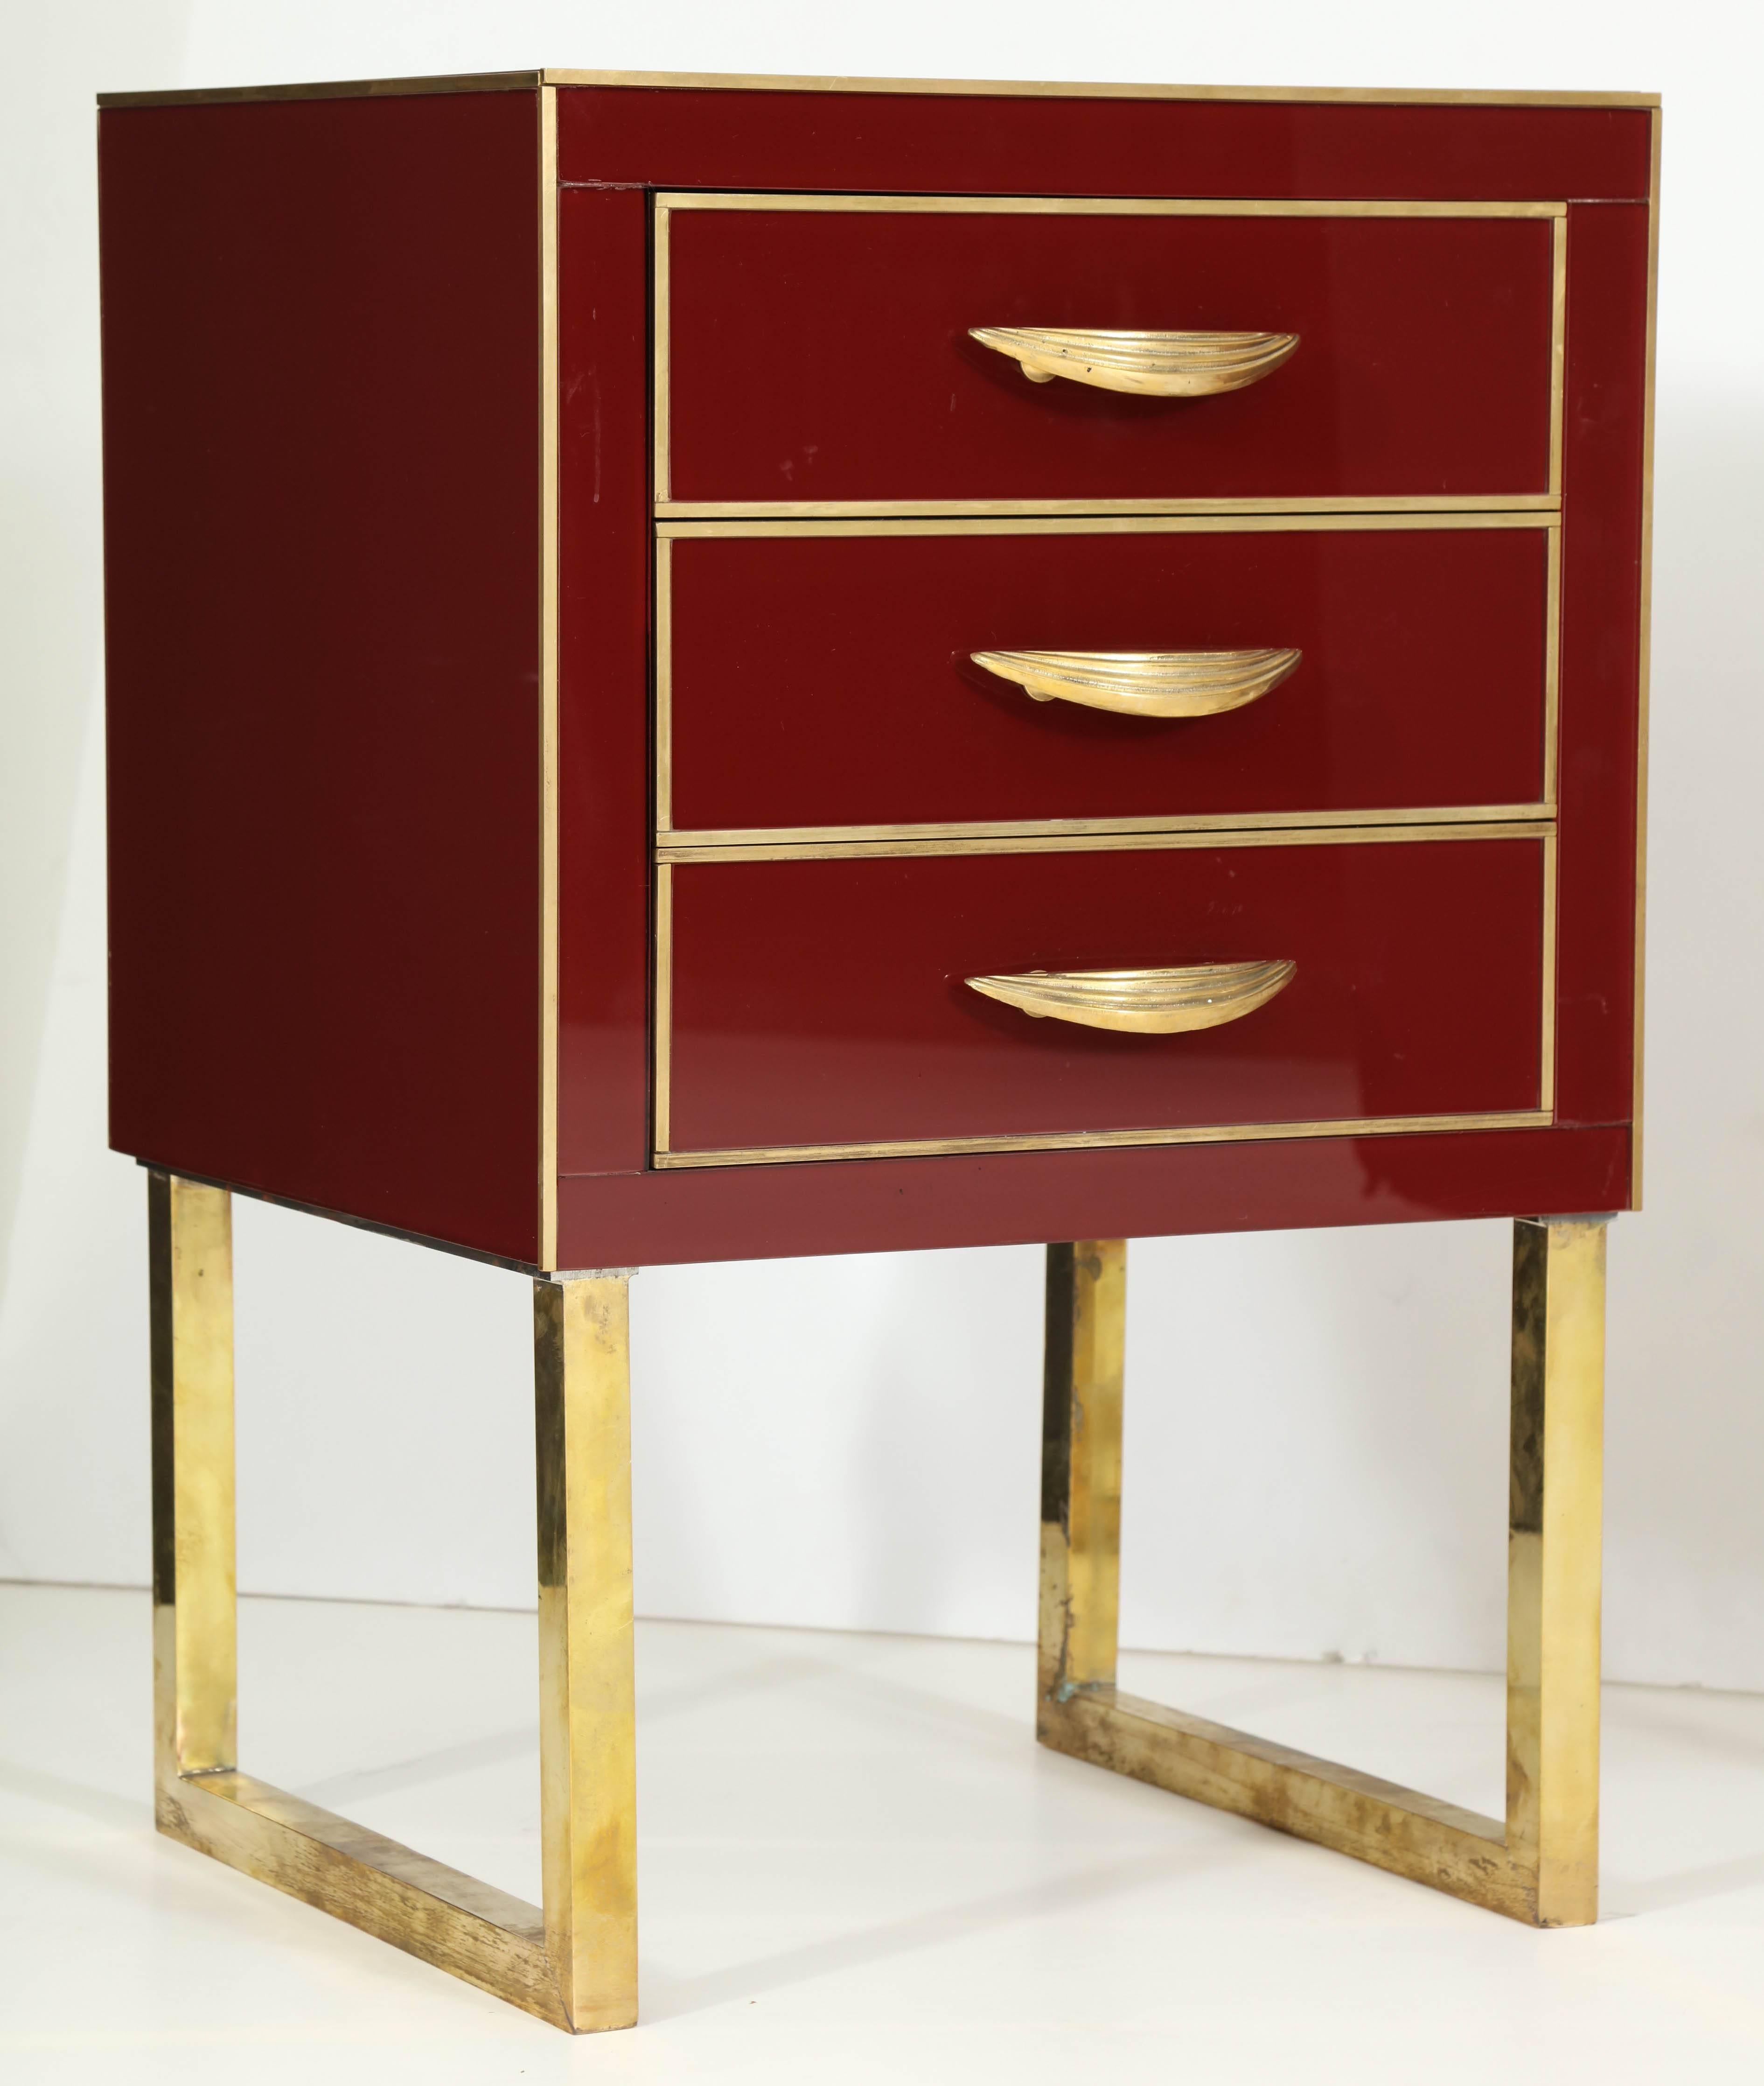 This pair of Italian Mid-Century nighstands is absolutely exquisite. Made of wood and covered in a high-gloss burgundy or deep red colored Venetian opaline glass with beautiful polished brass inlays, pulls and brass flat legs. 

These nightstands